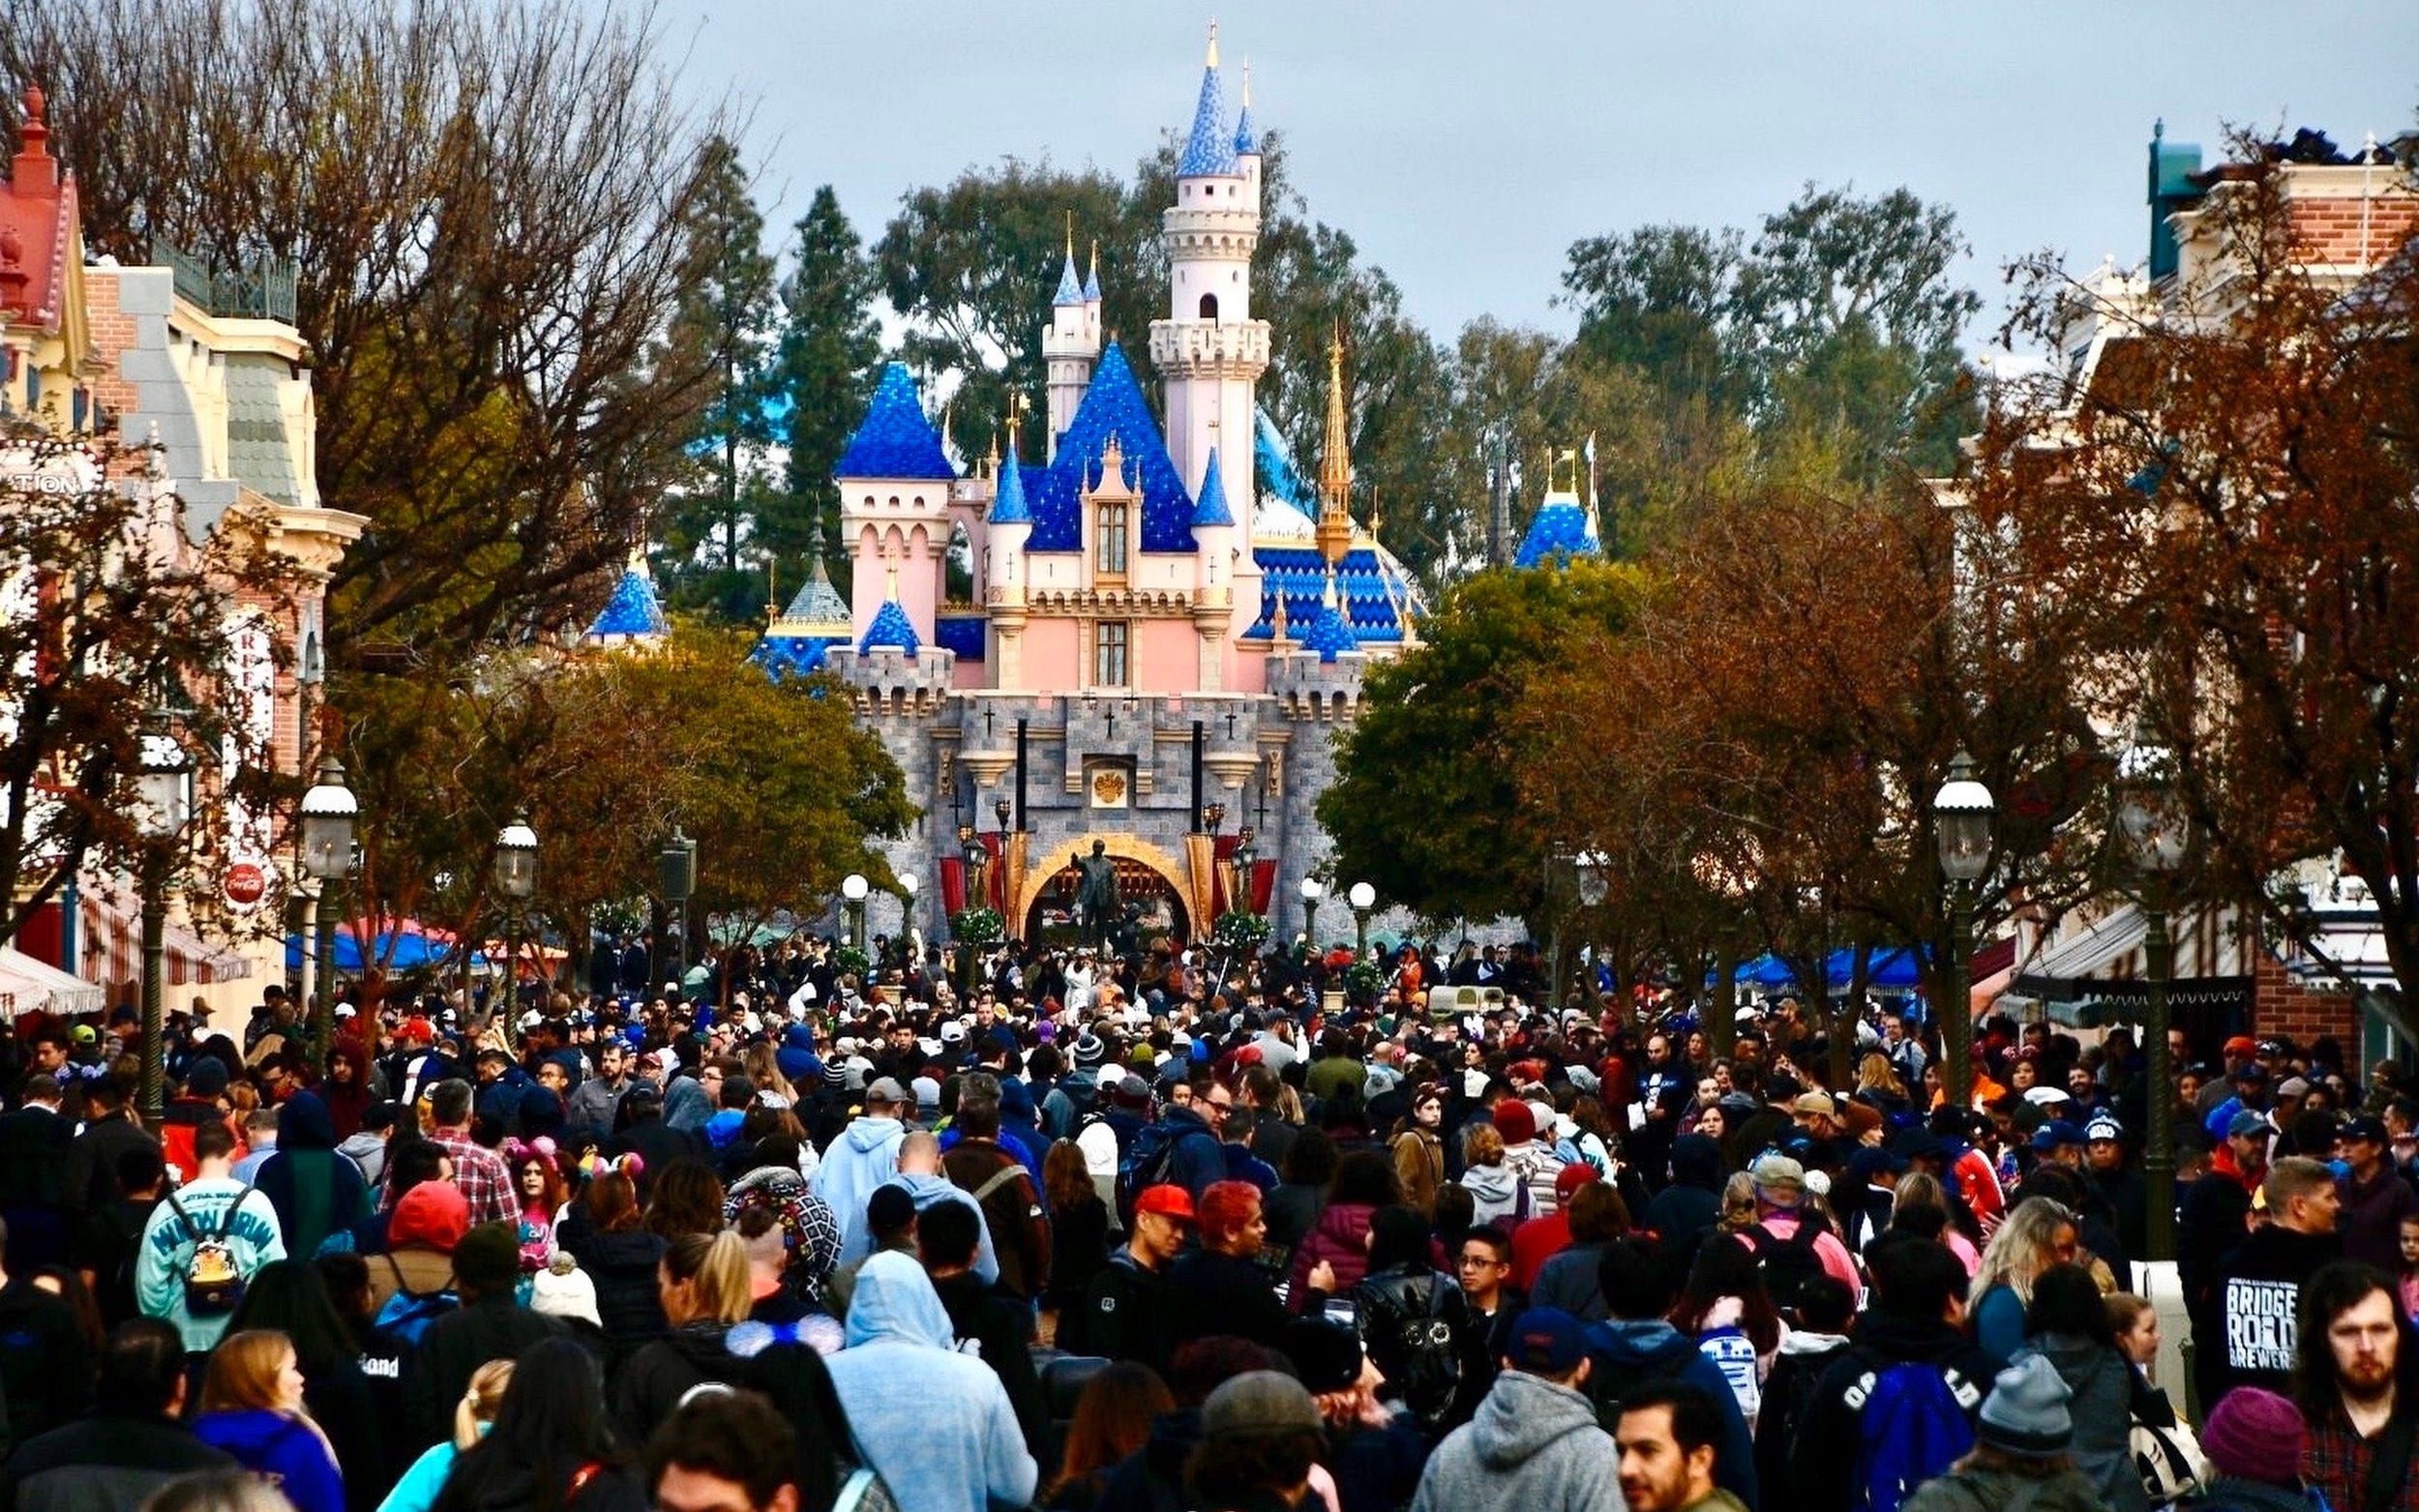 disneyland clamps down on visitors who pretend to be disabled to jump queues